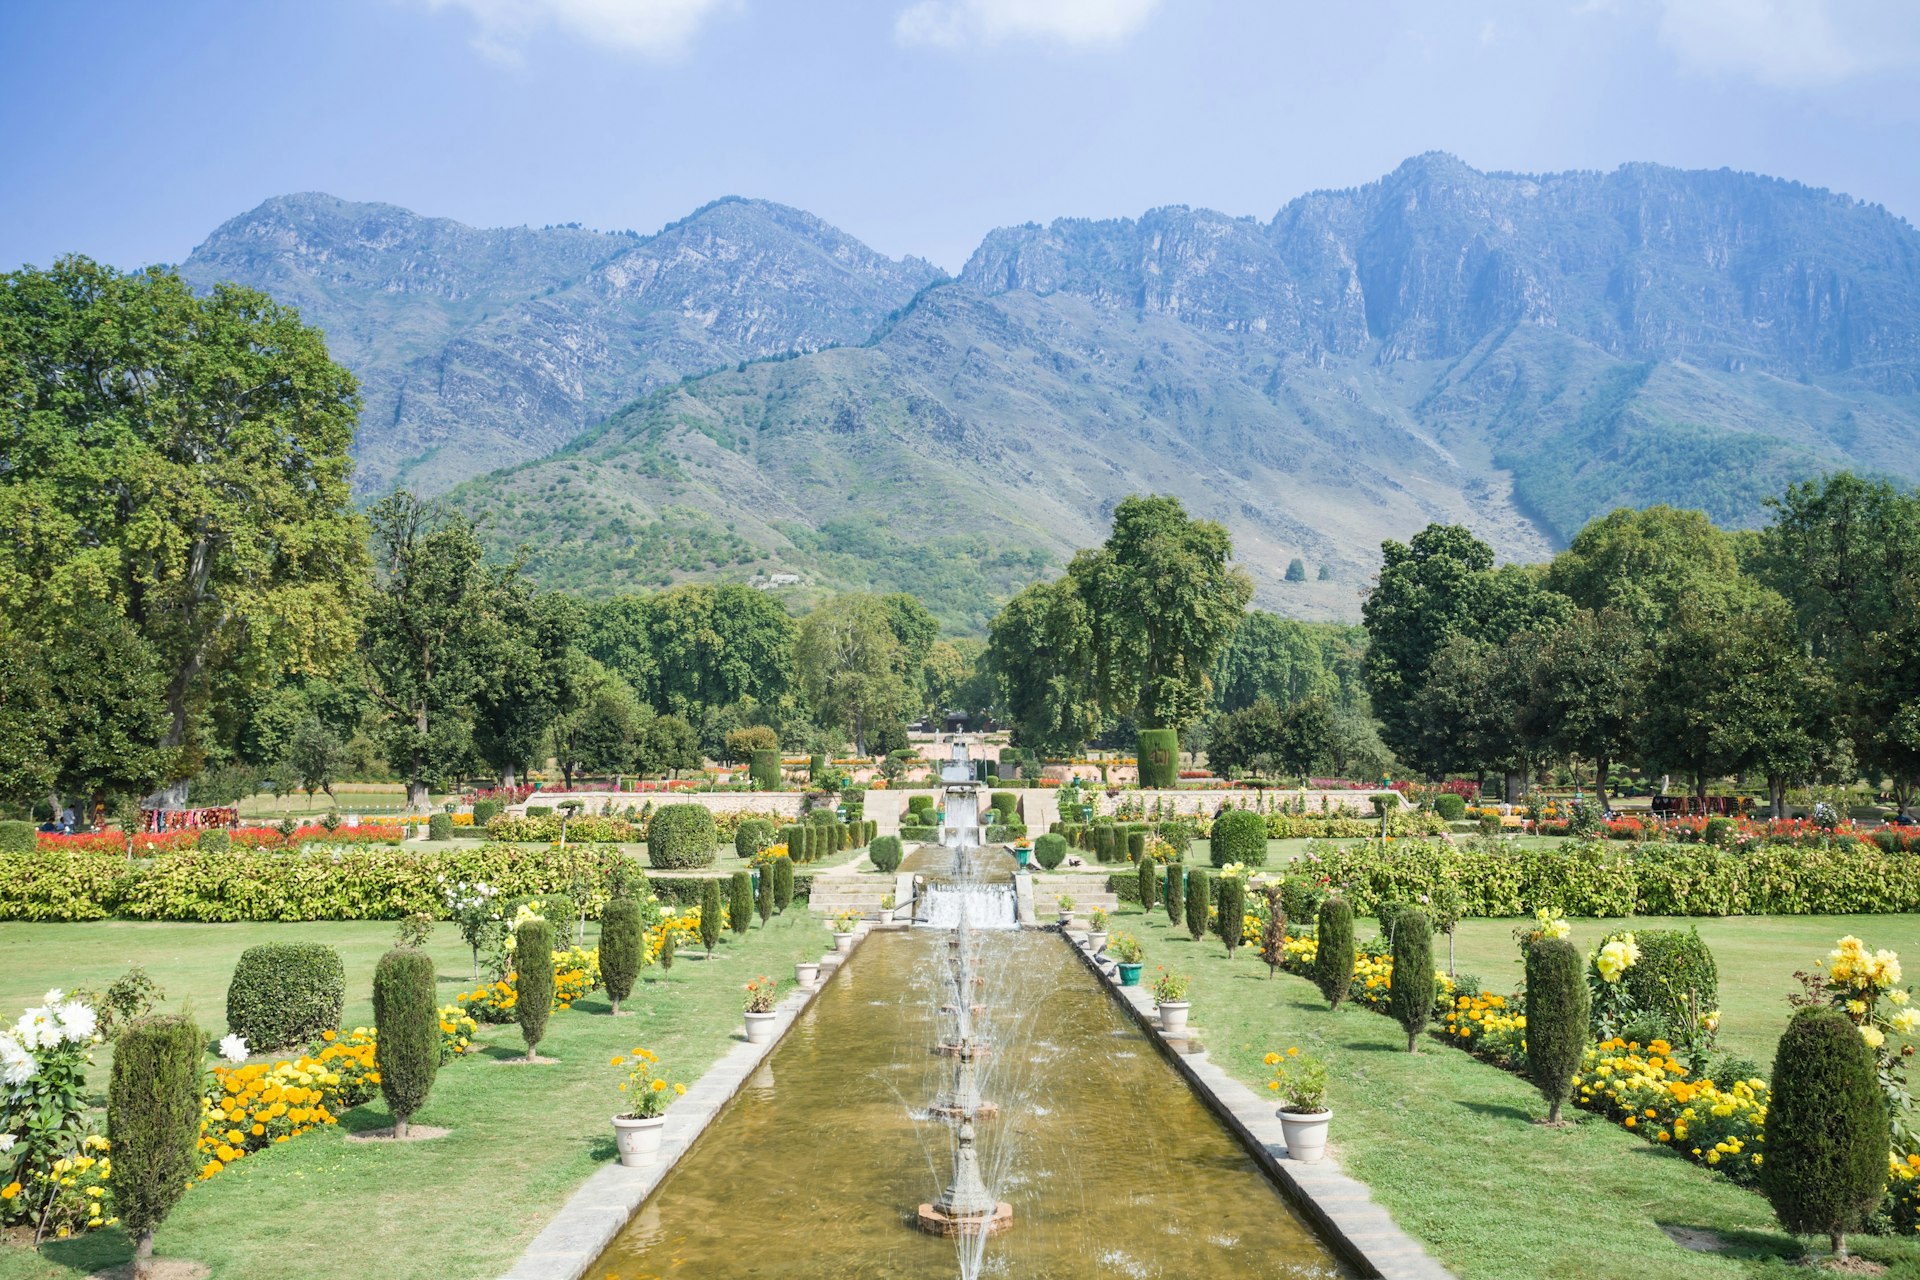 A view of the tiered central pond that runs down the centre of the long Nishat Bagh garden in Srinagar. The pond, which is filled with small fountains, is surrounded by flowers and bushes.